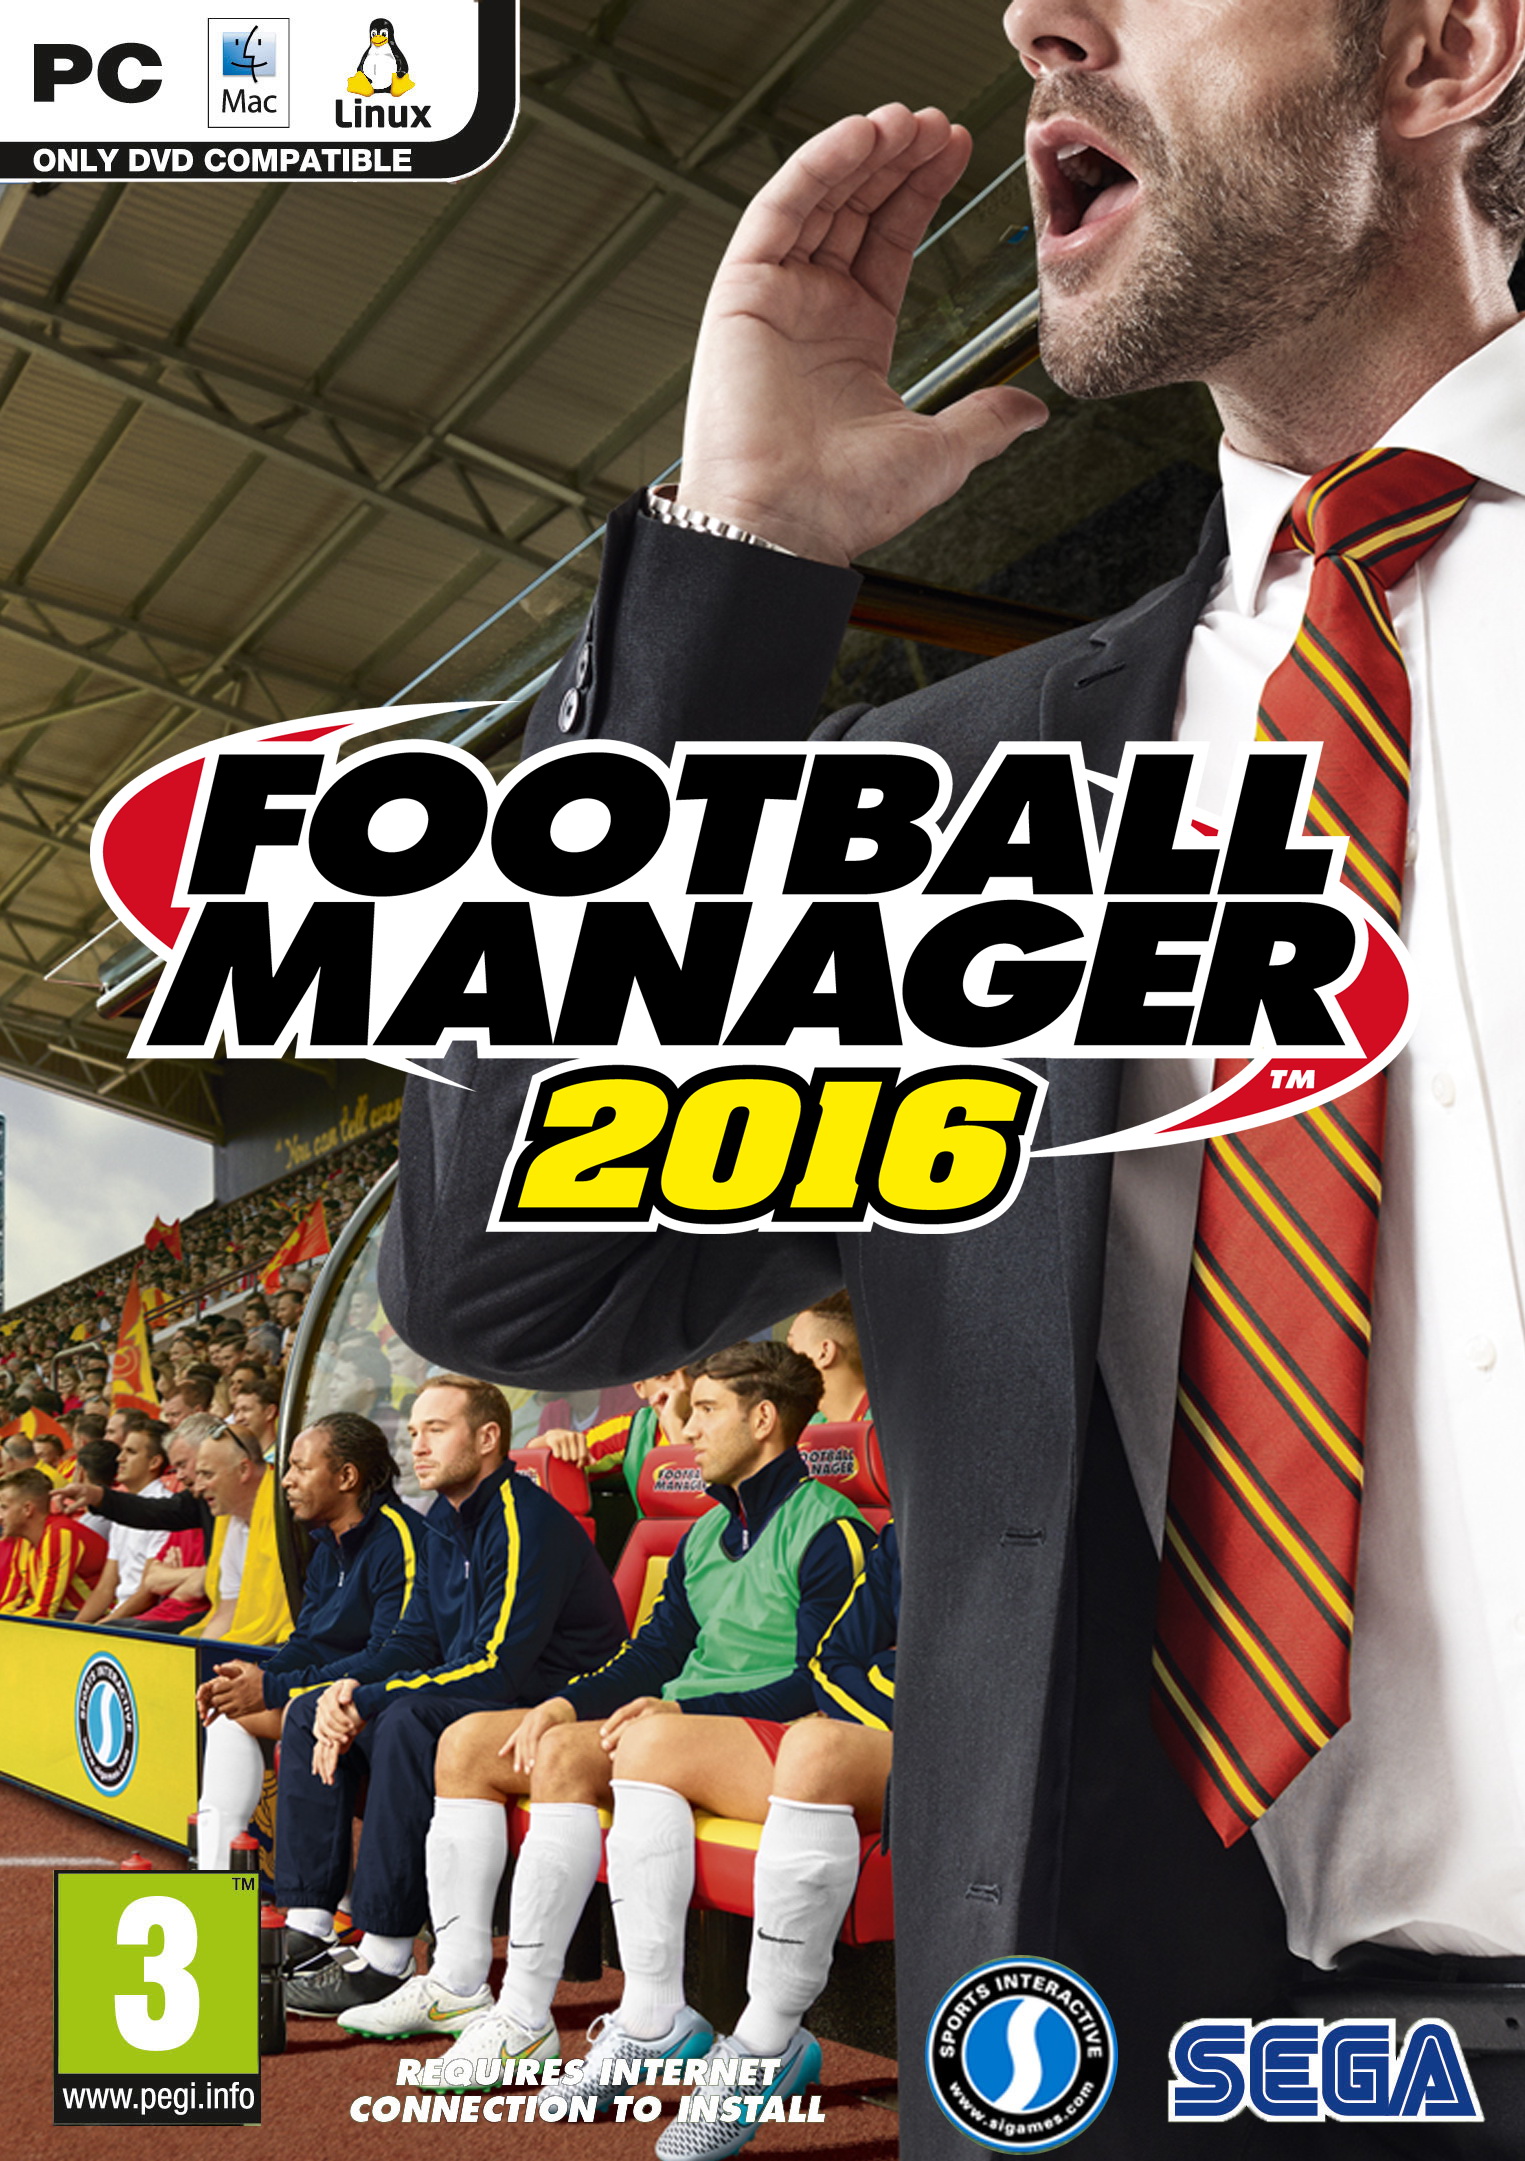 football manager 2016 download demo